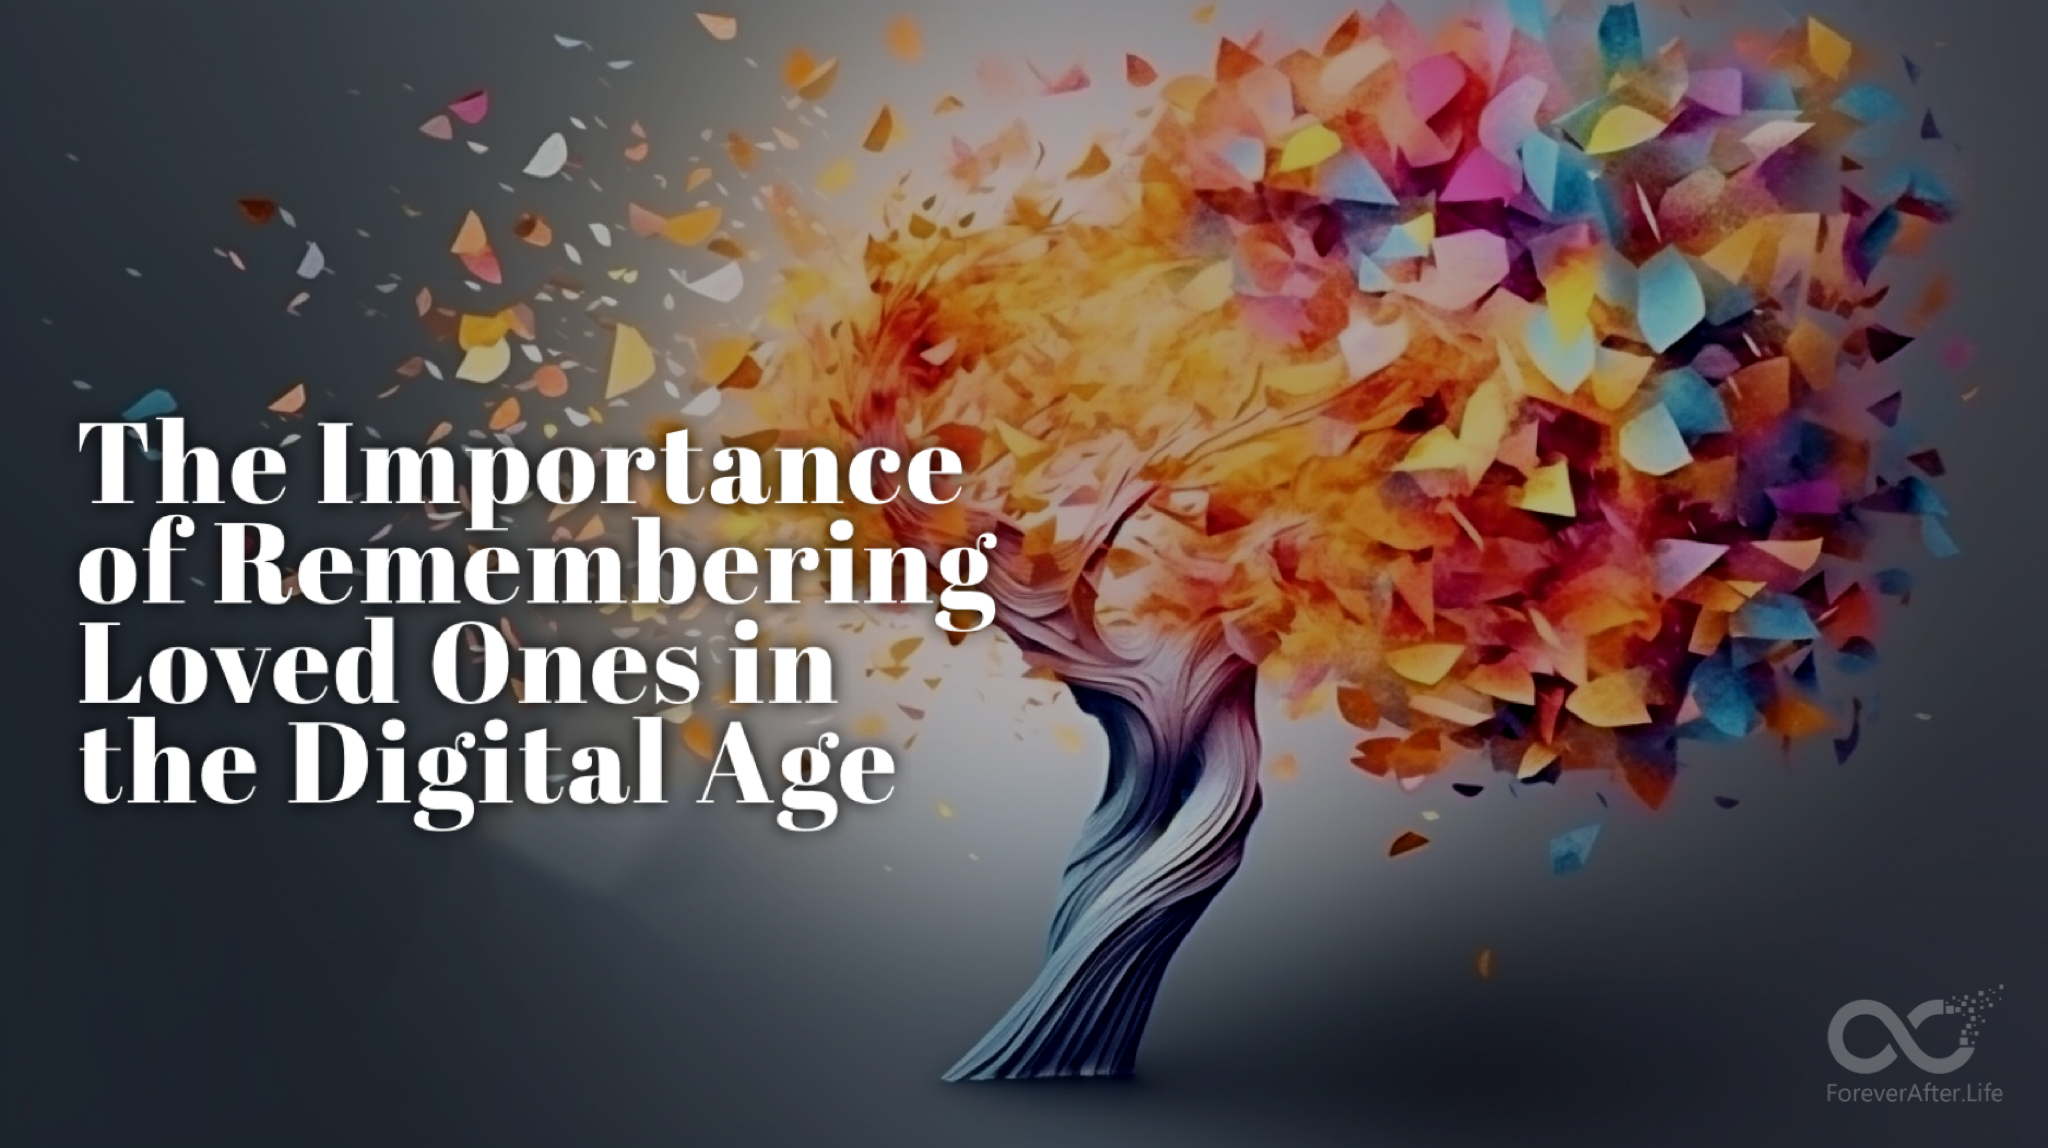 The Importance of Remembering Loved Ones in the Digital Age